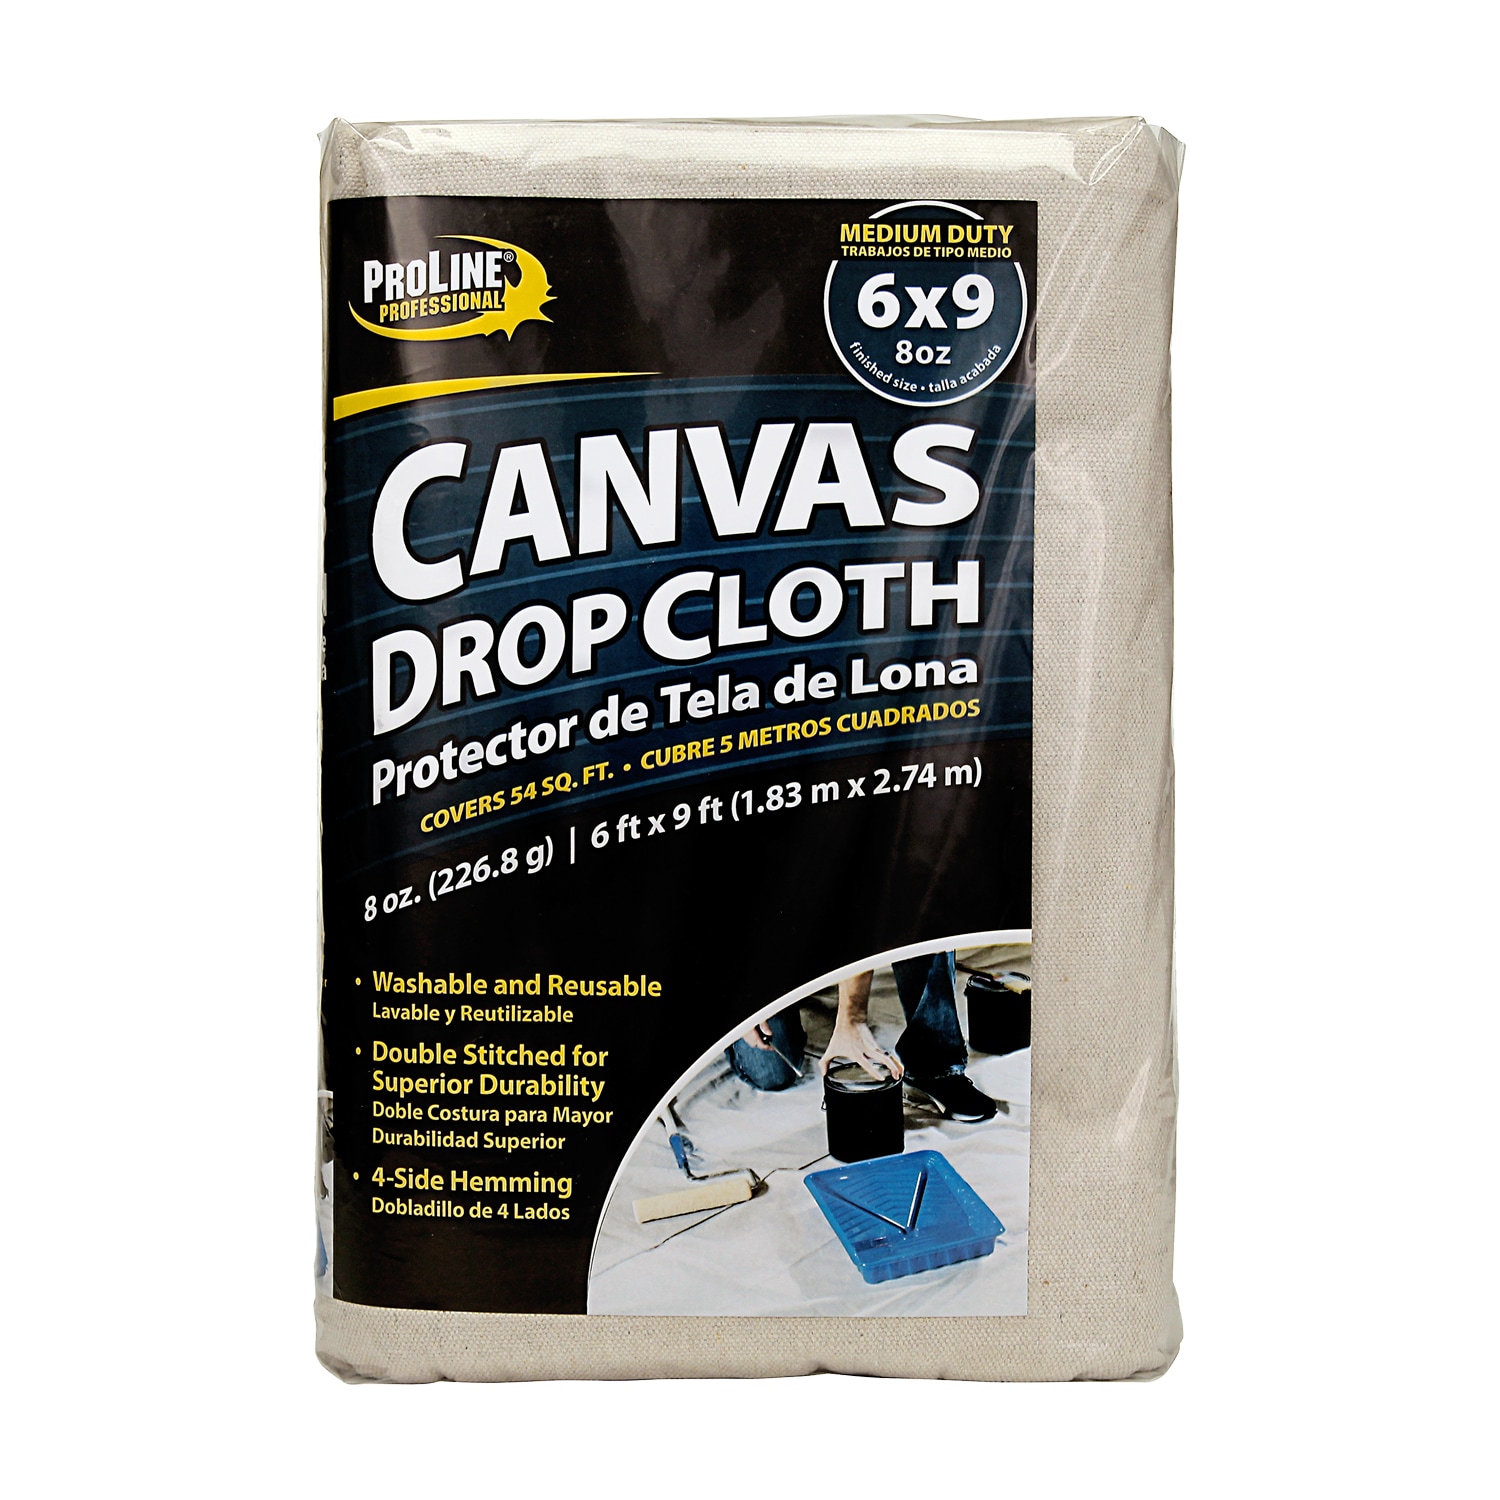 Canvas Drop Cloth 6x9 ft Pack of 2 - Odourless Painters Drop Cloth for  Painting Cotton Canvas Tarps for Floor & Furniture Protection - All Purpose  Canvas Fabric Painting Drop Cloths by